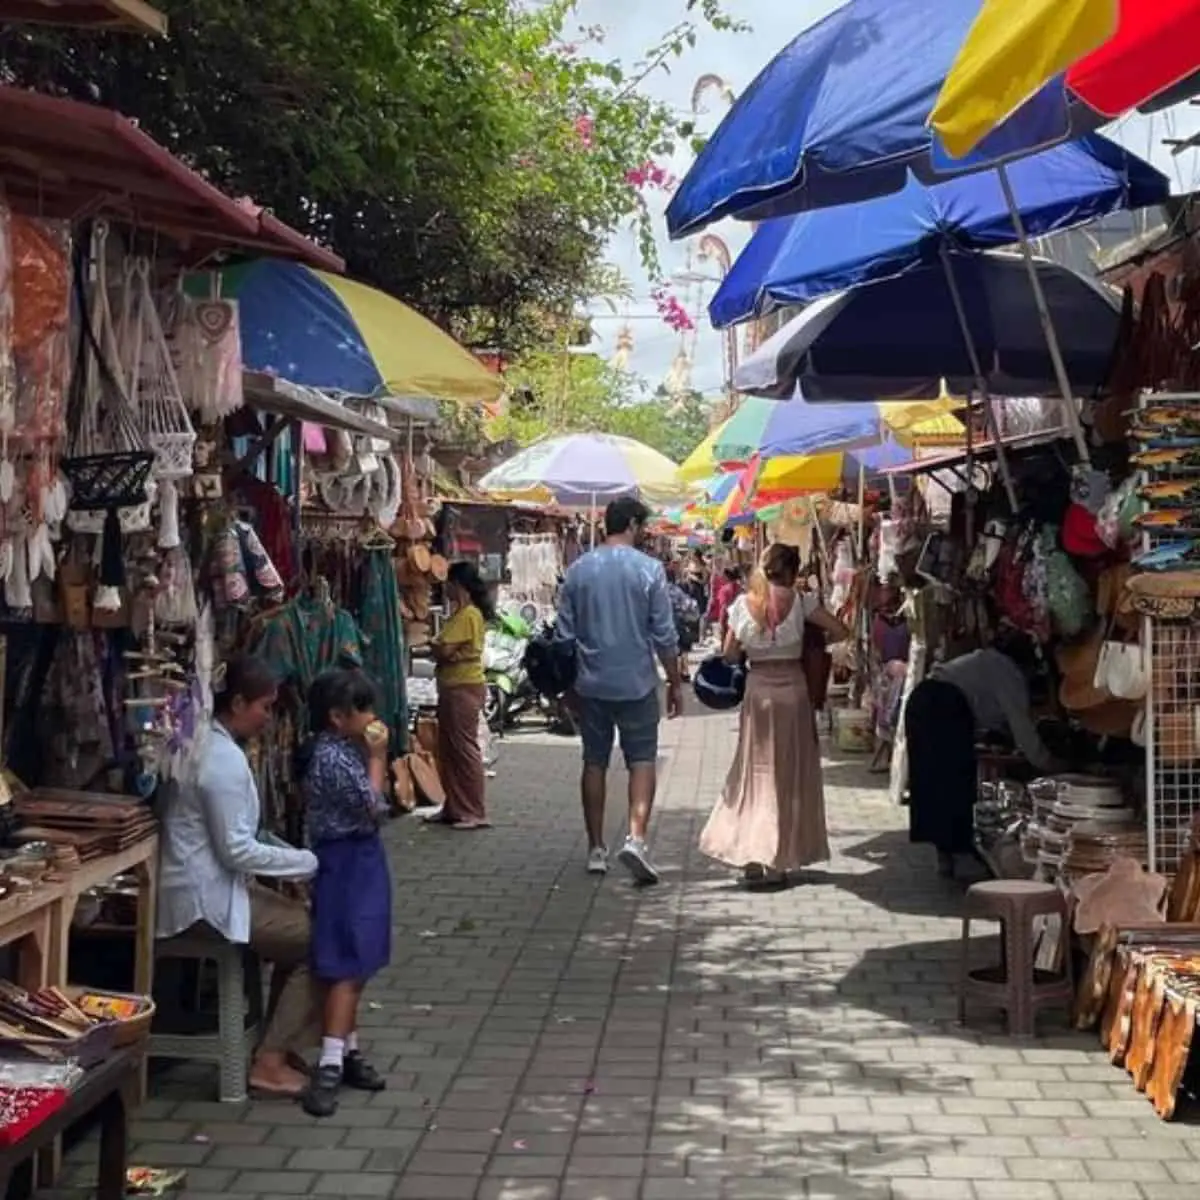 Stalls filled with handicrafts and souvenirs at Ubud Market with people strolling around